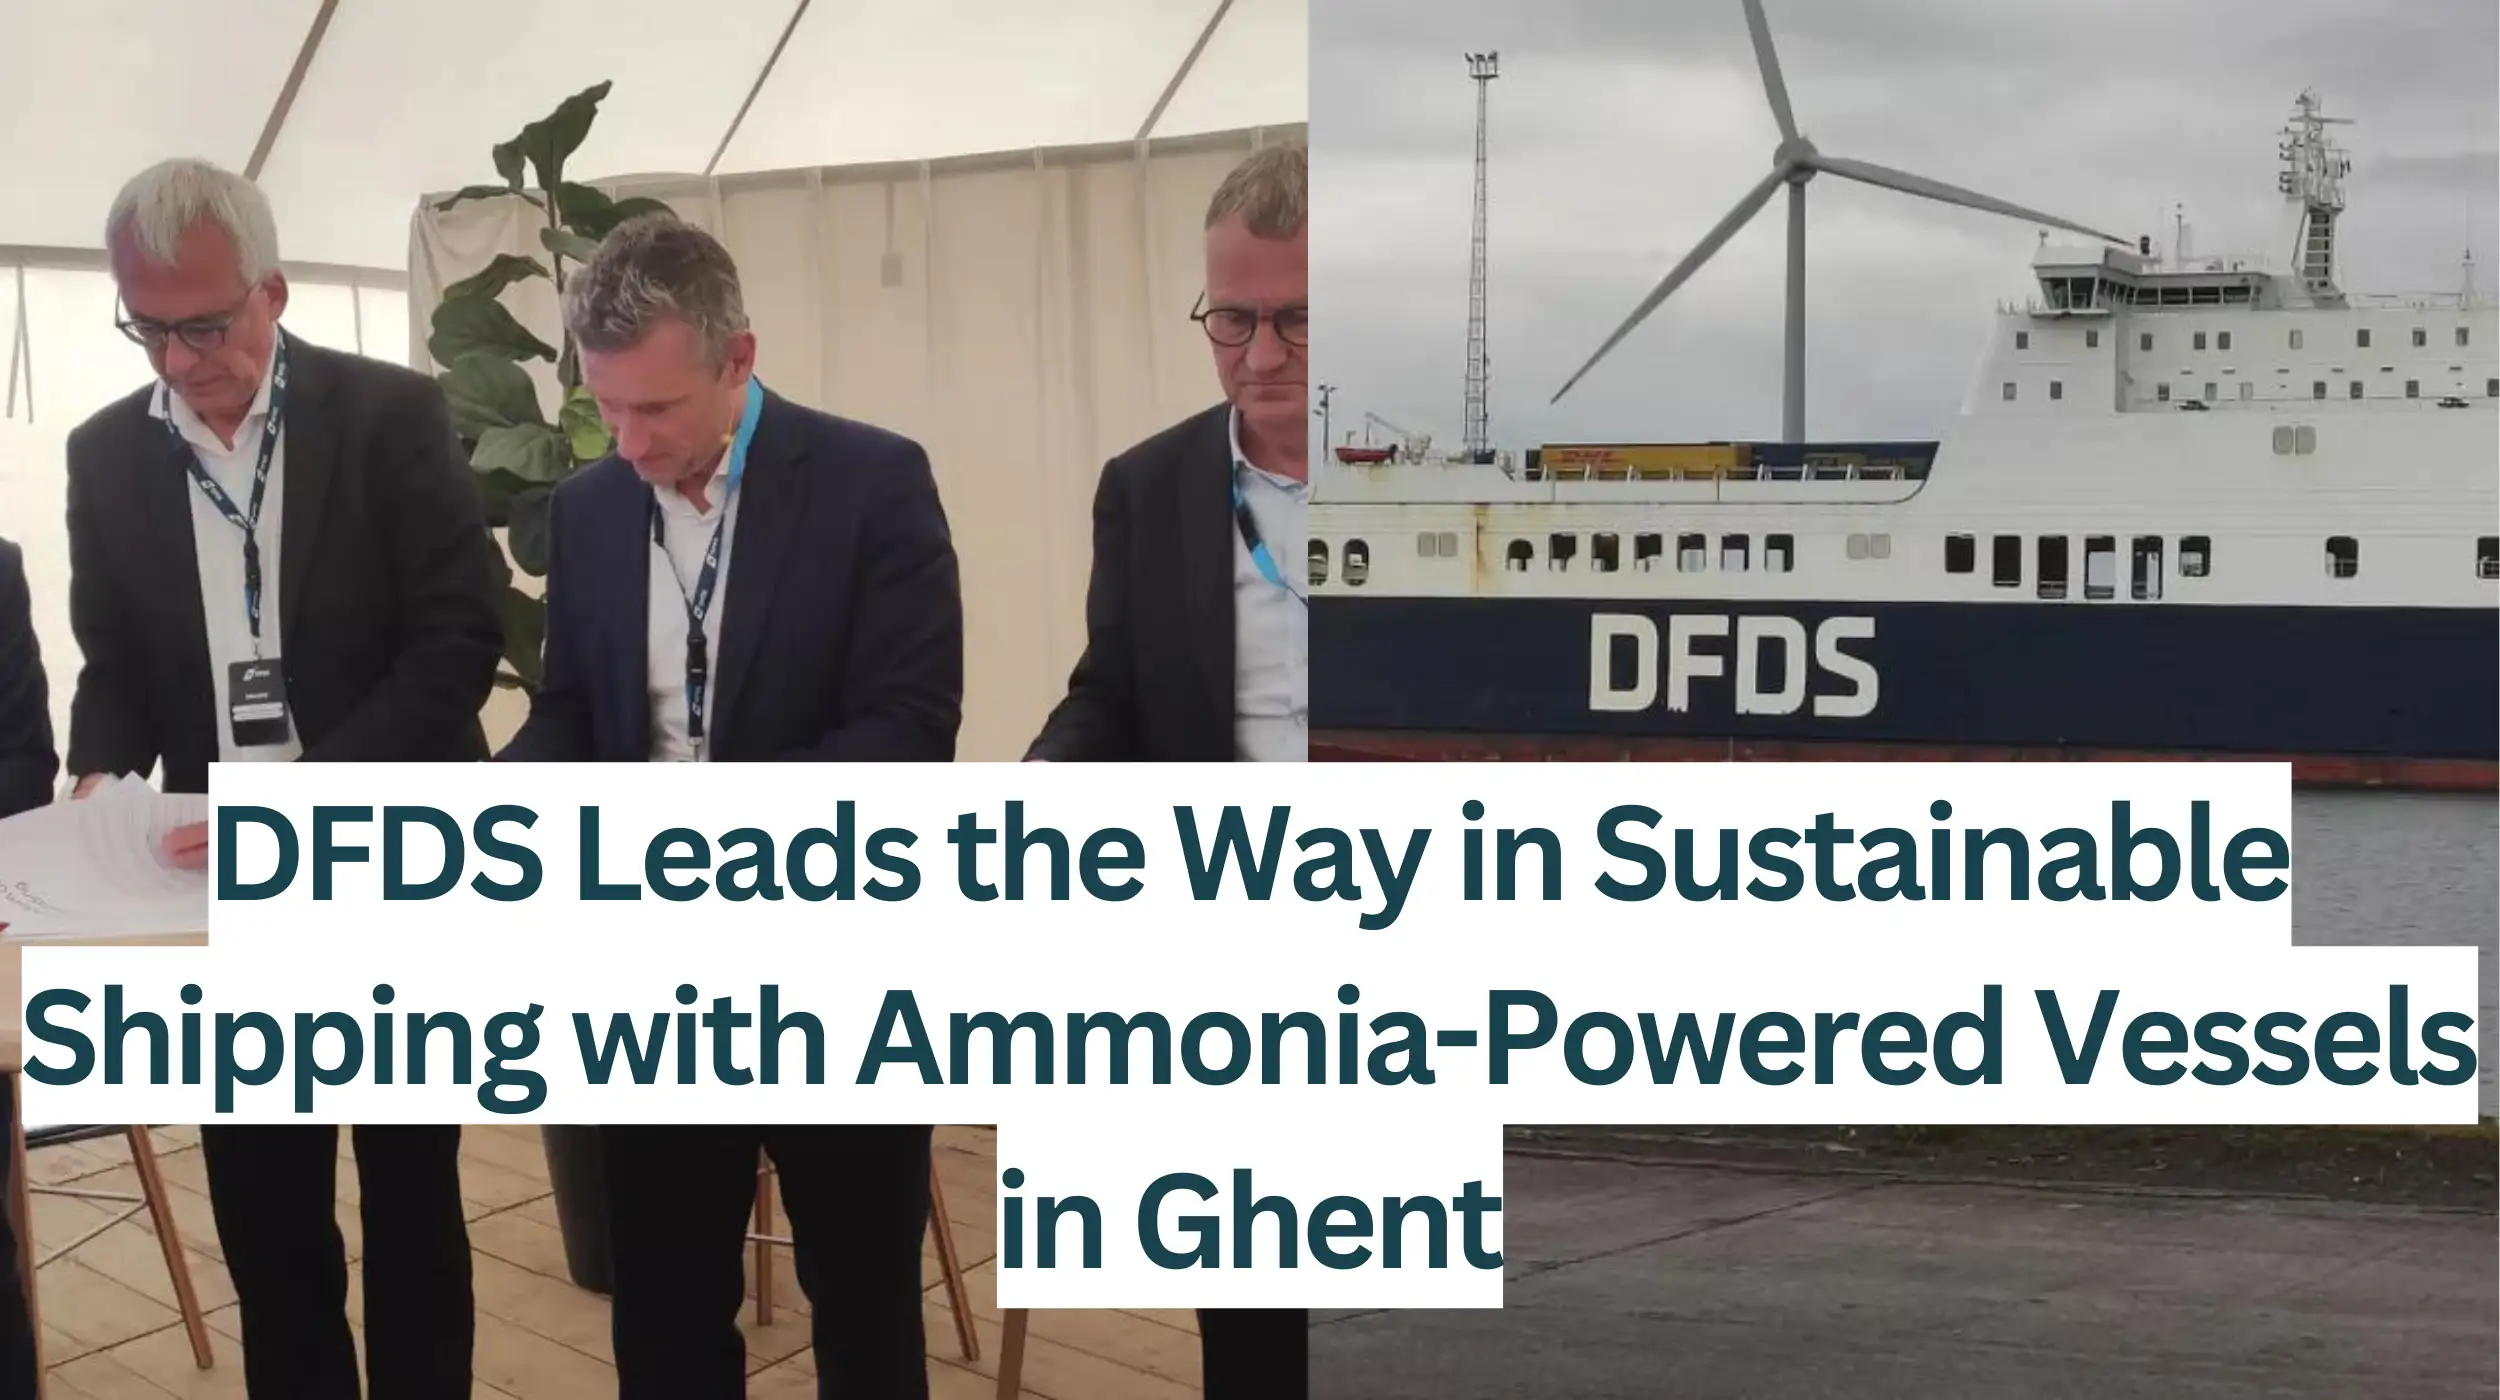 DFDS-Leads-the-Way-in-Sustainable-Shipping-with-Ammonia-Powered-Vessels-in-Ghent